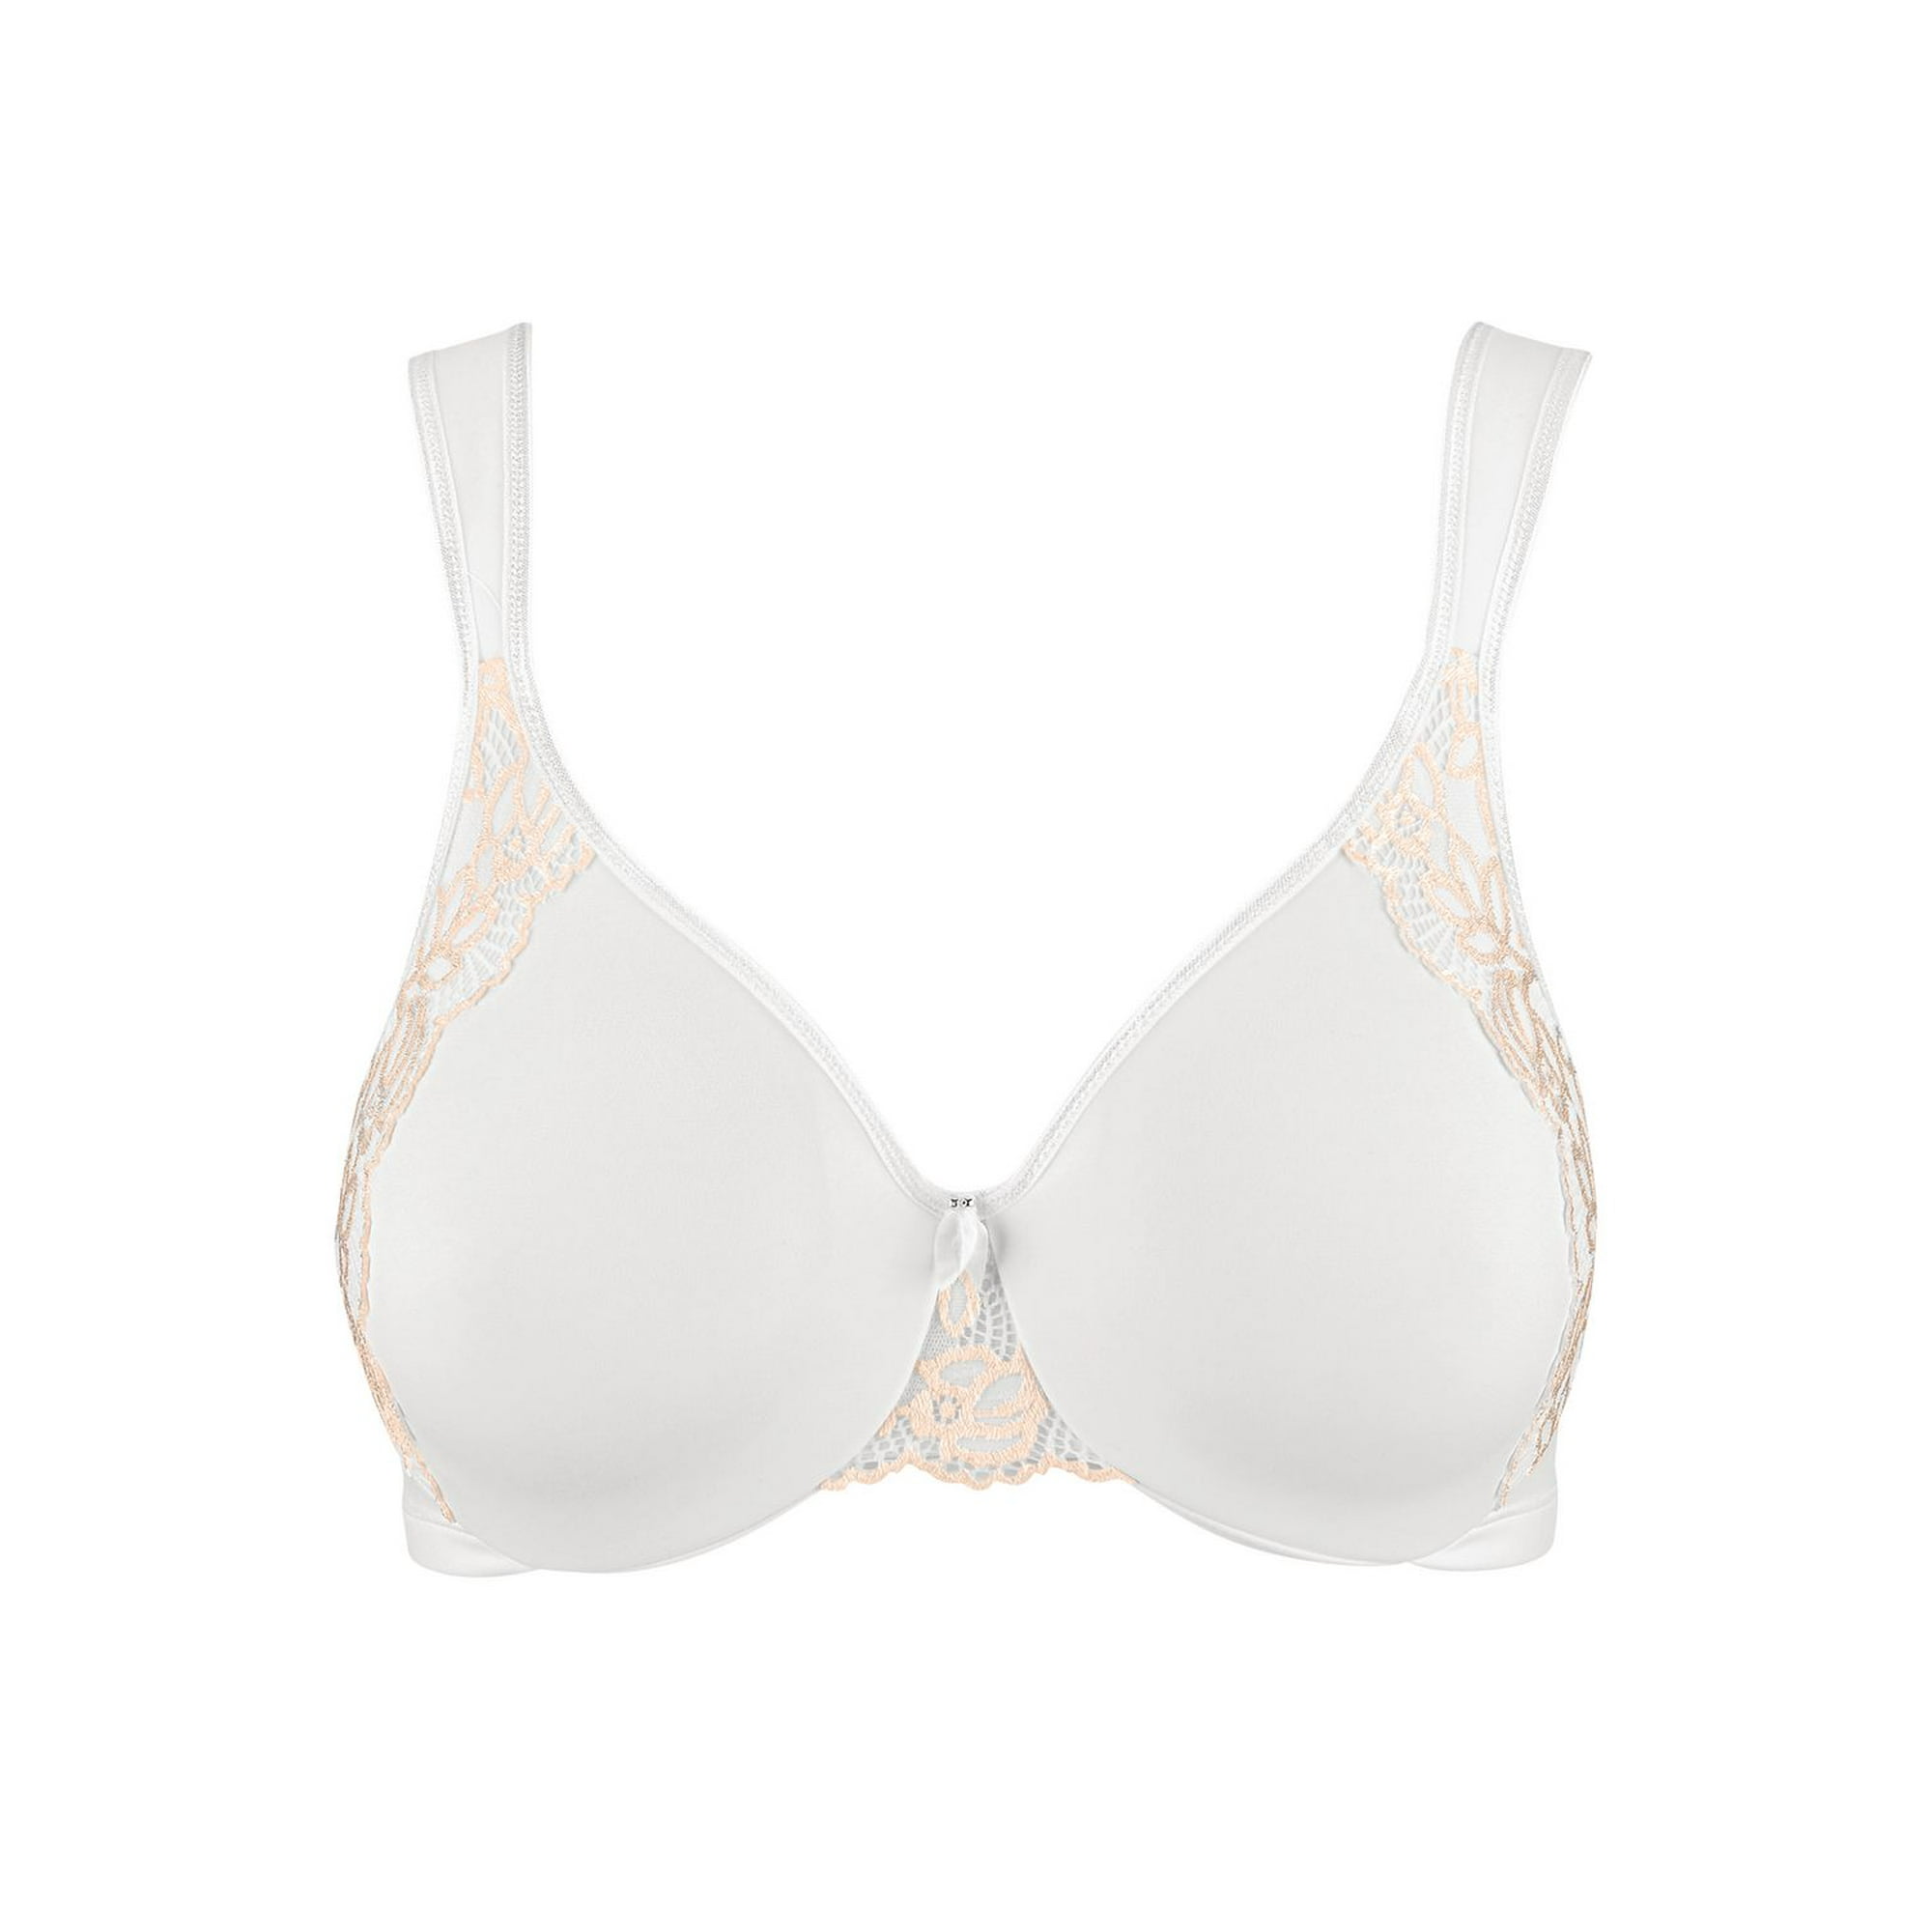 Wonderbra Firm Control Full Brief Panty, White, Medium : :  Clothing, Shoes & Accessories